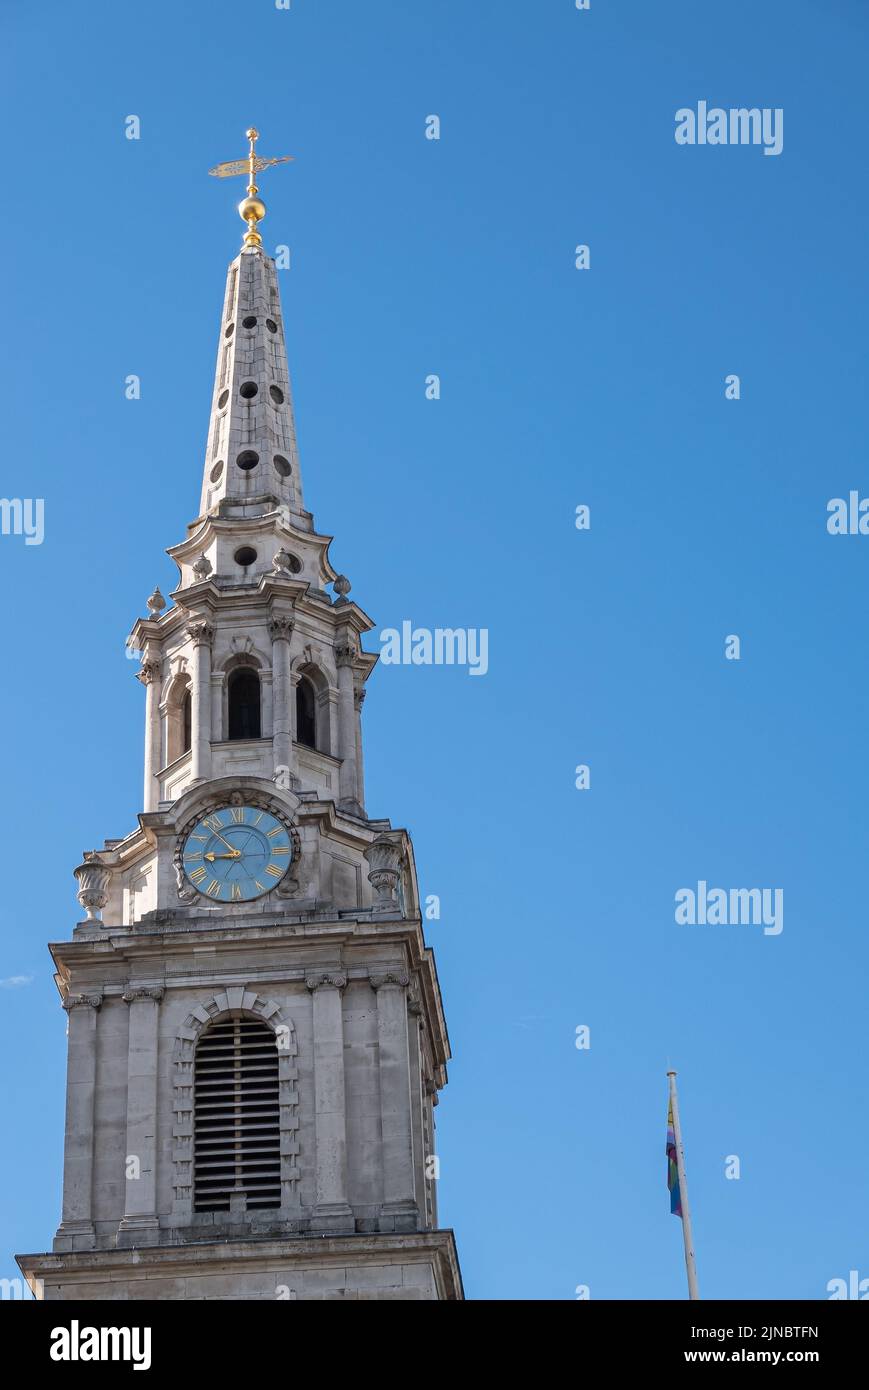 London, UK- July 4, 2022: Trafalgar Square. Spire of Saint Martin-in-the-fields church features clock, against blue morning sky with flag on pole. Stock Photo